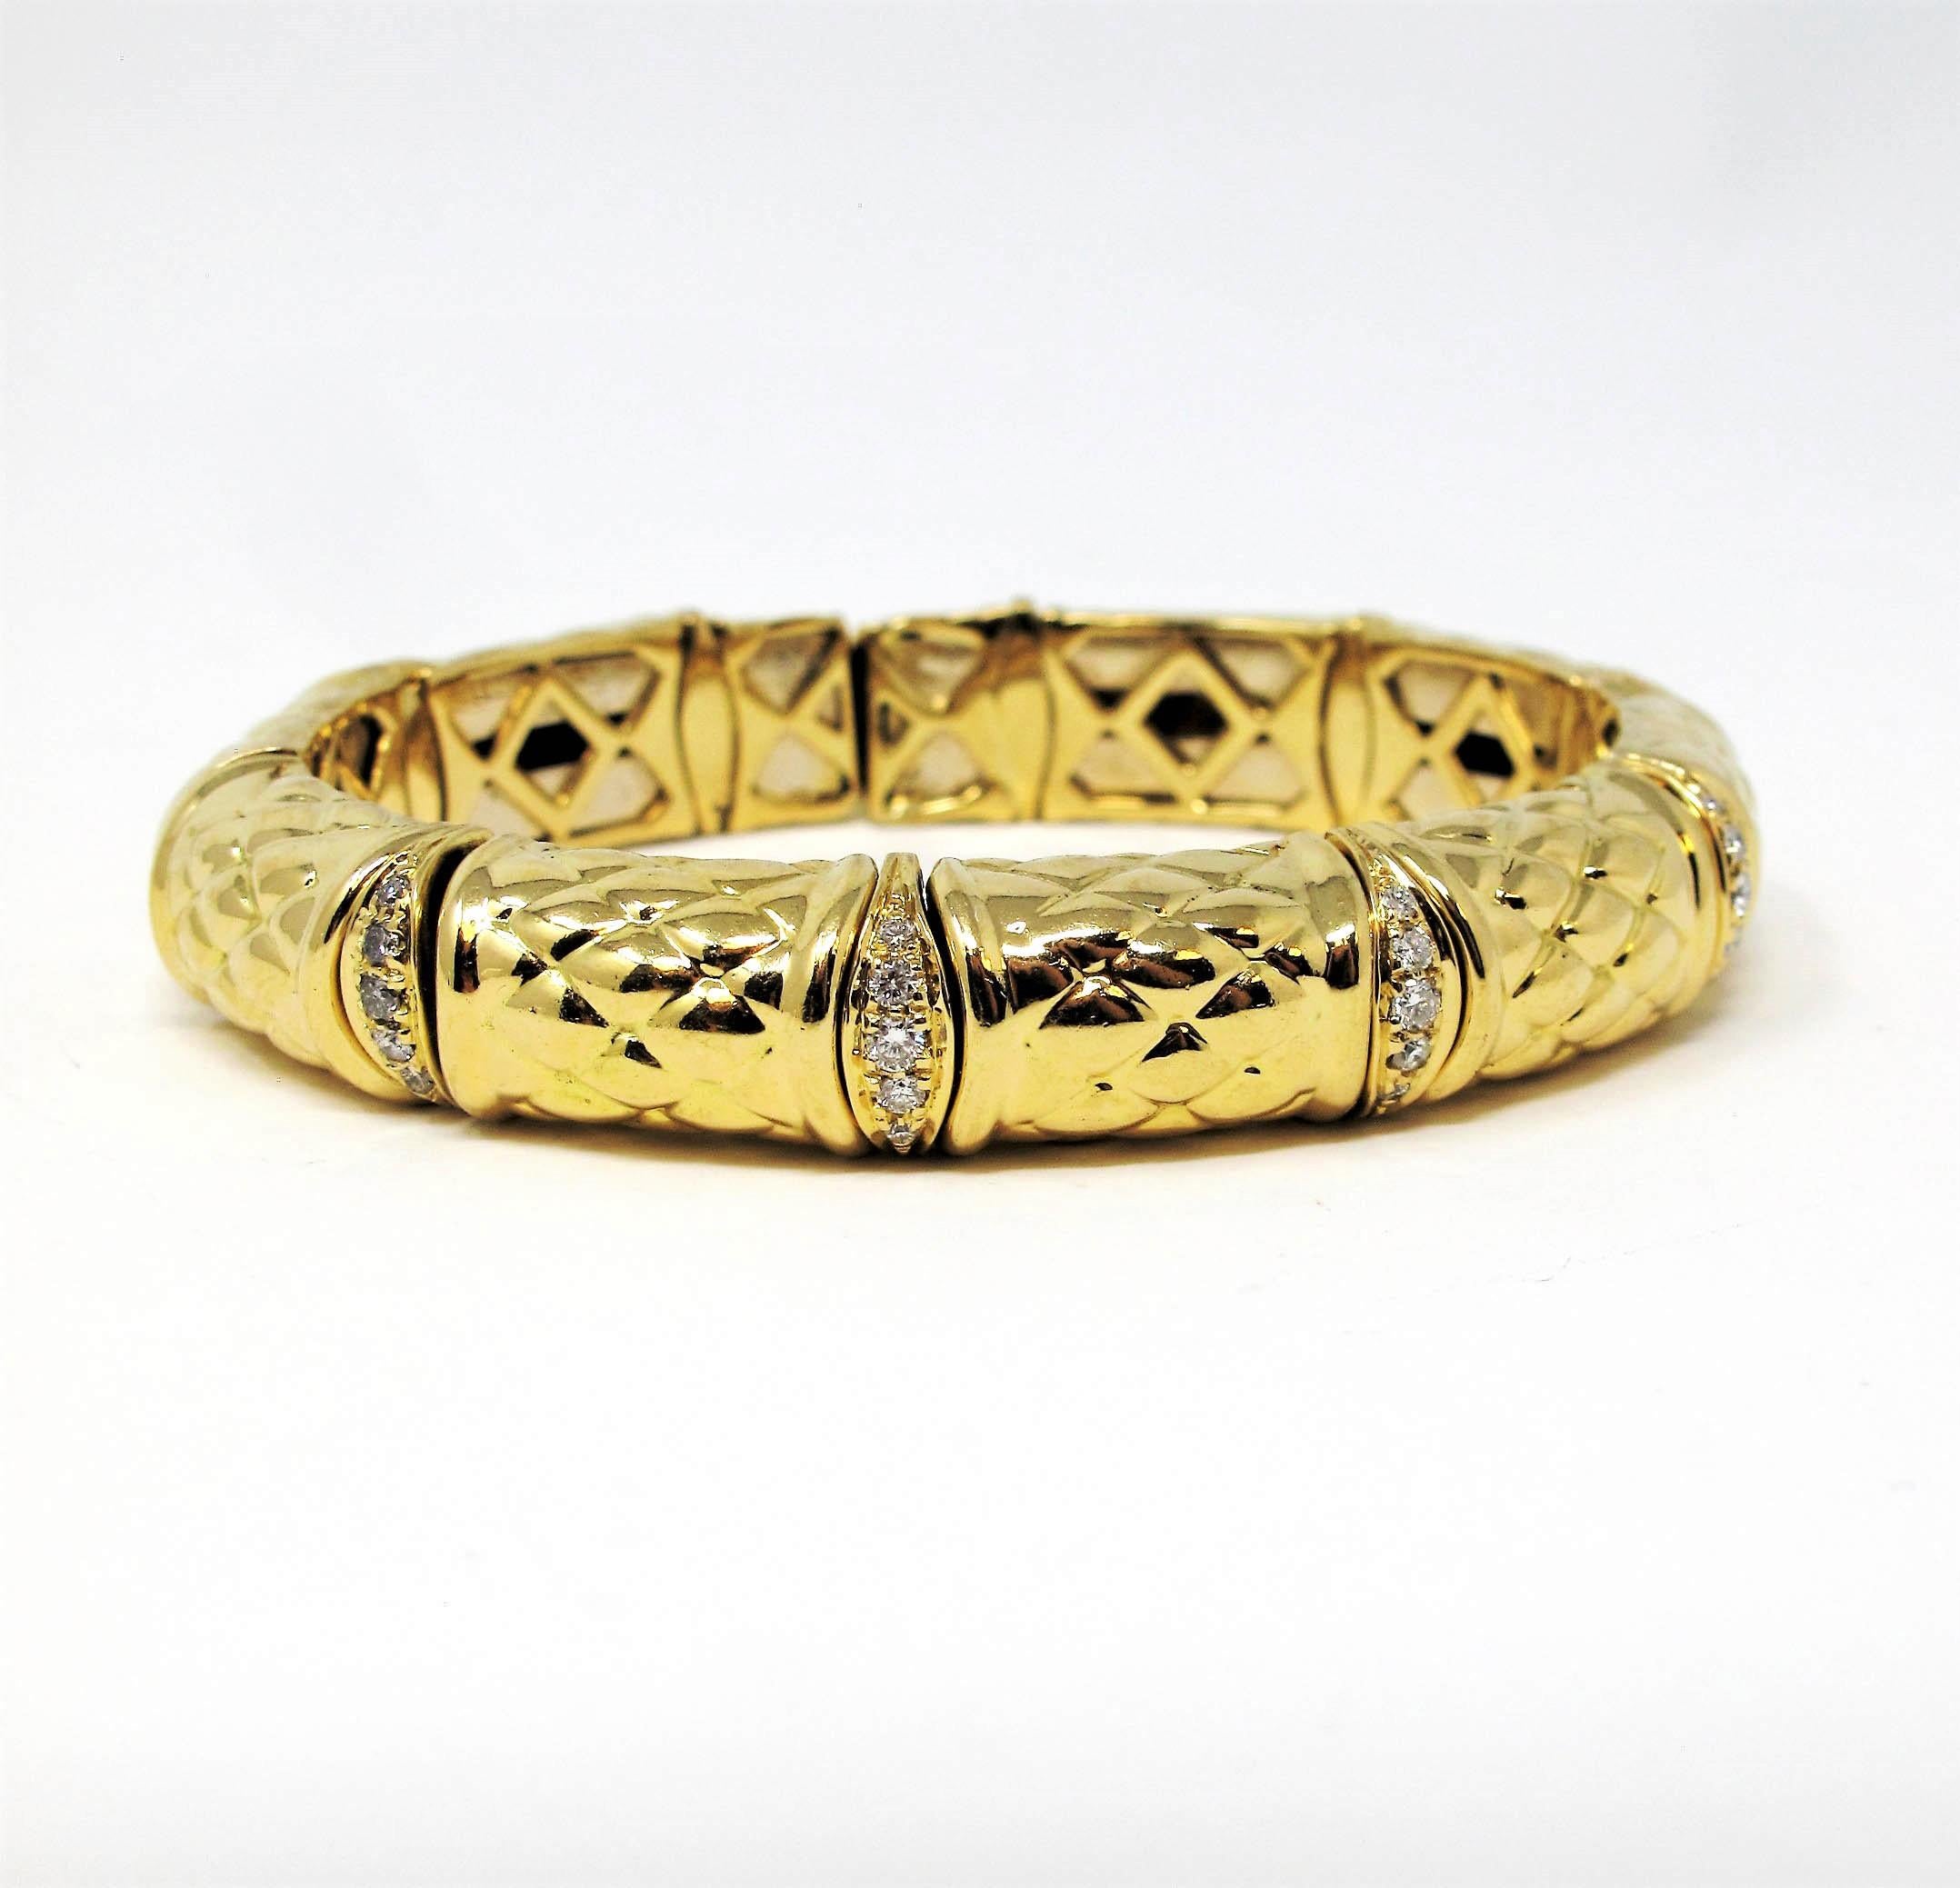 Gorgeous textured 18 karat yellow gold bangle bracelet with pave diamond accents. This incredible bracelet offers both comfort and style with its unique flexible bamboo style design. The subtle diamond embellishments add just a hint of understated